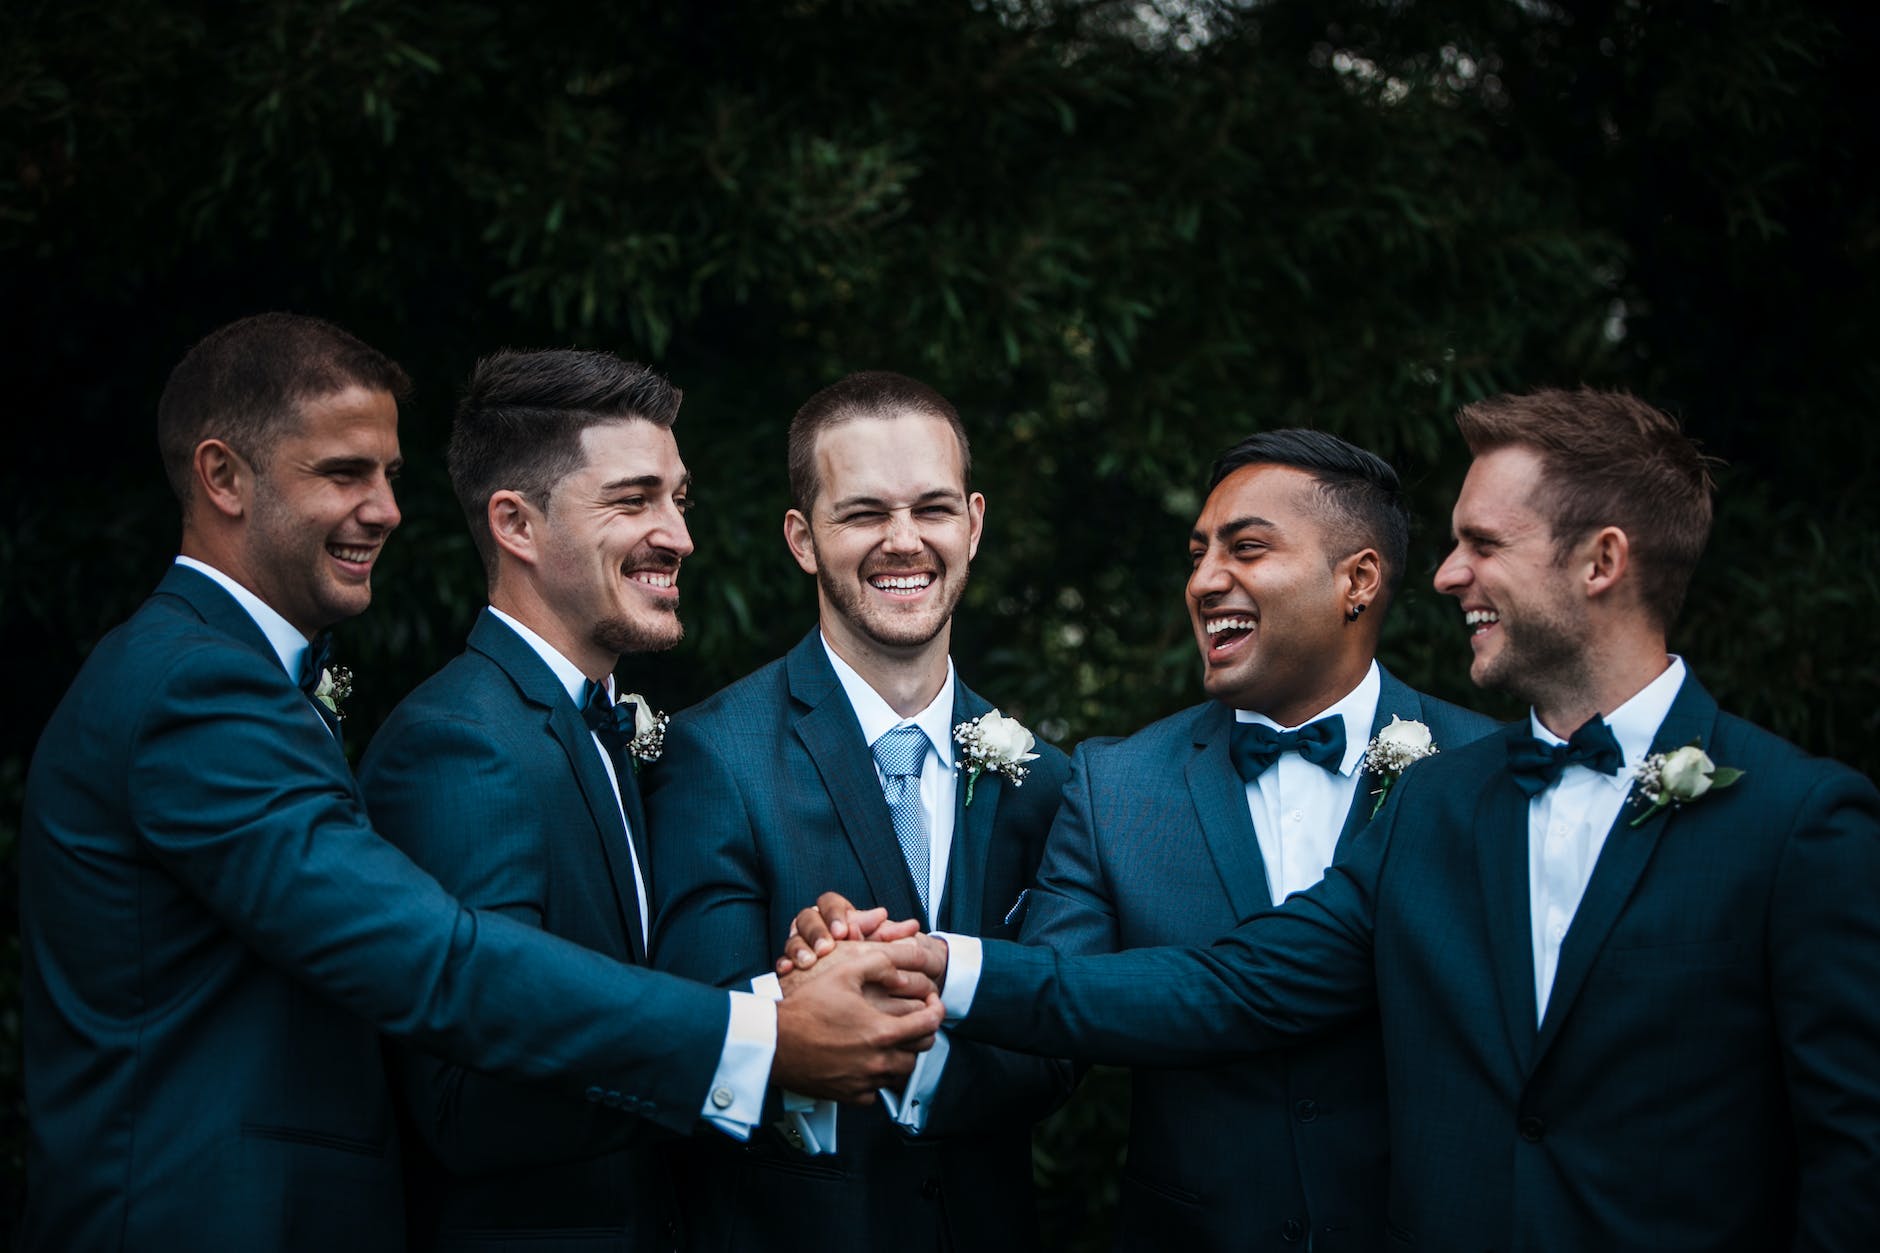 Groomsmen Gifts They’ll Actually Appreciate: Thoughtful DIY Ideas Beyond the Boring Old Tie